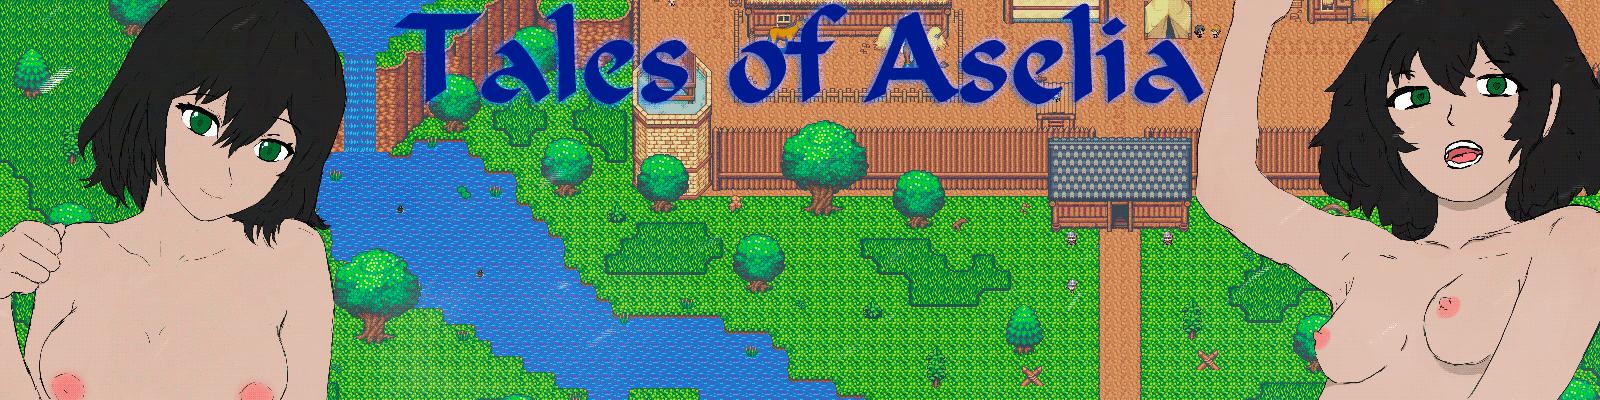 Tales of Aselia v0.0915 by masqetch Porn Game